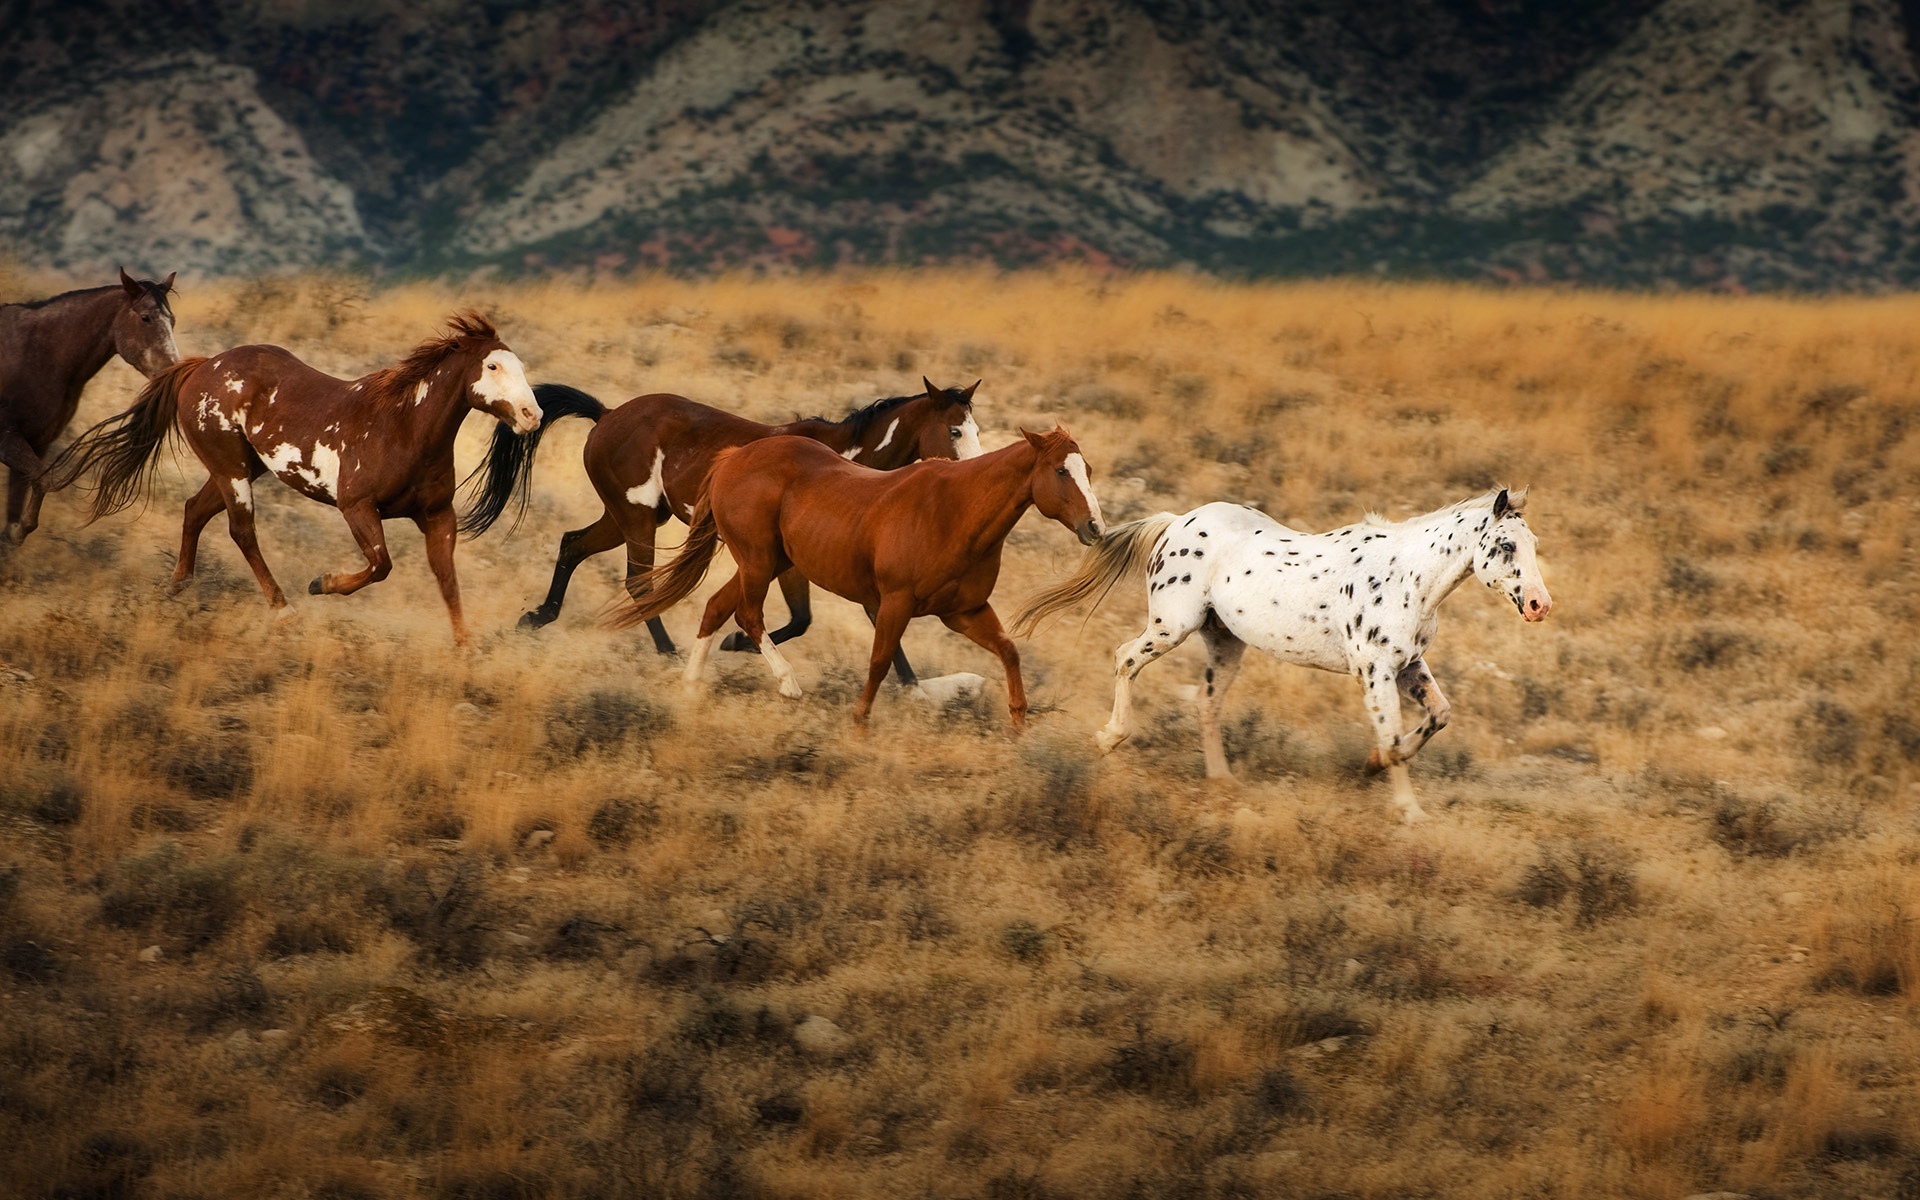 Wild horse advocates push to enter Wyoming lawsuit” | Friends of Animals